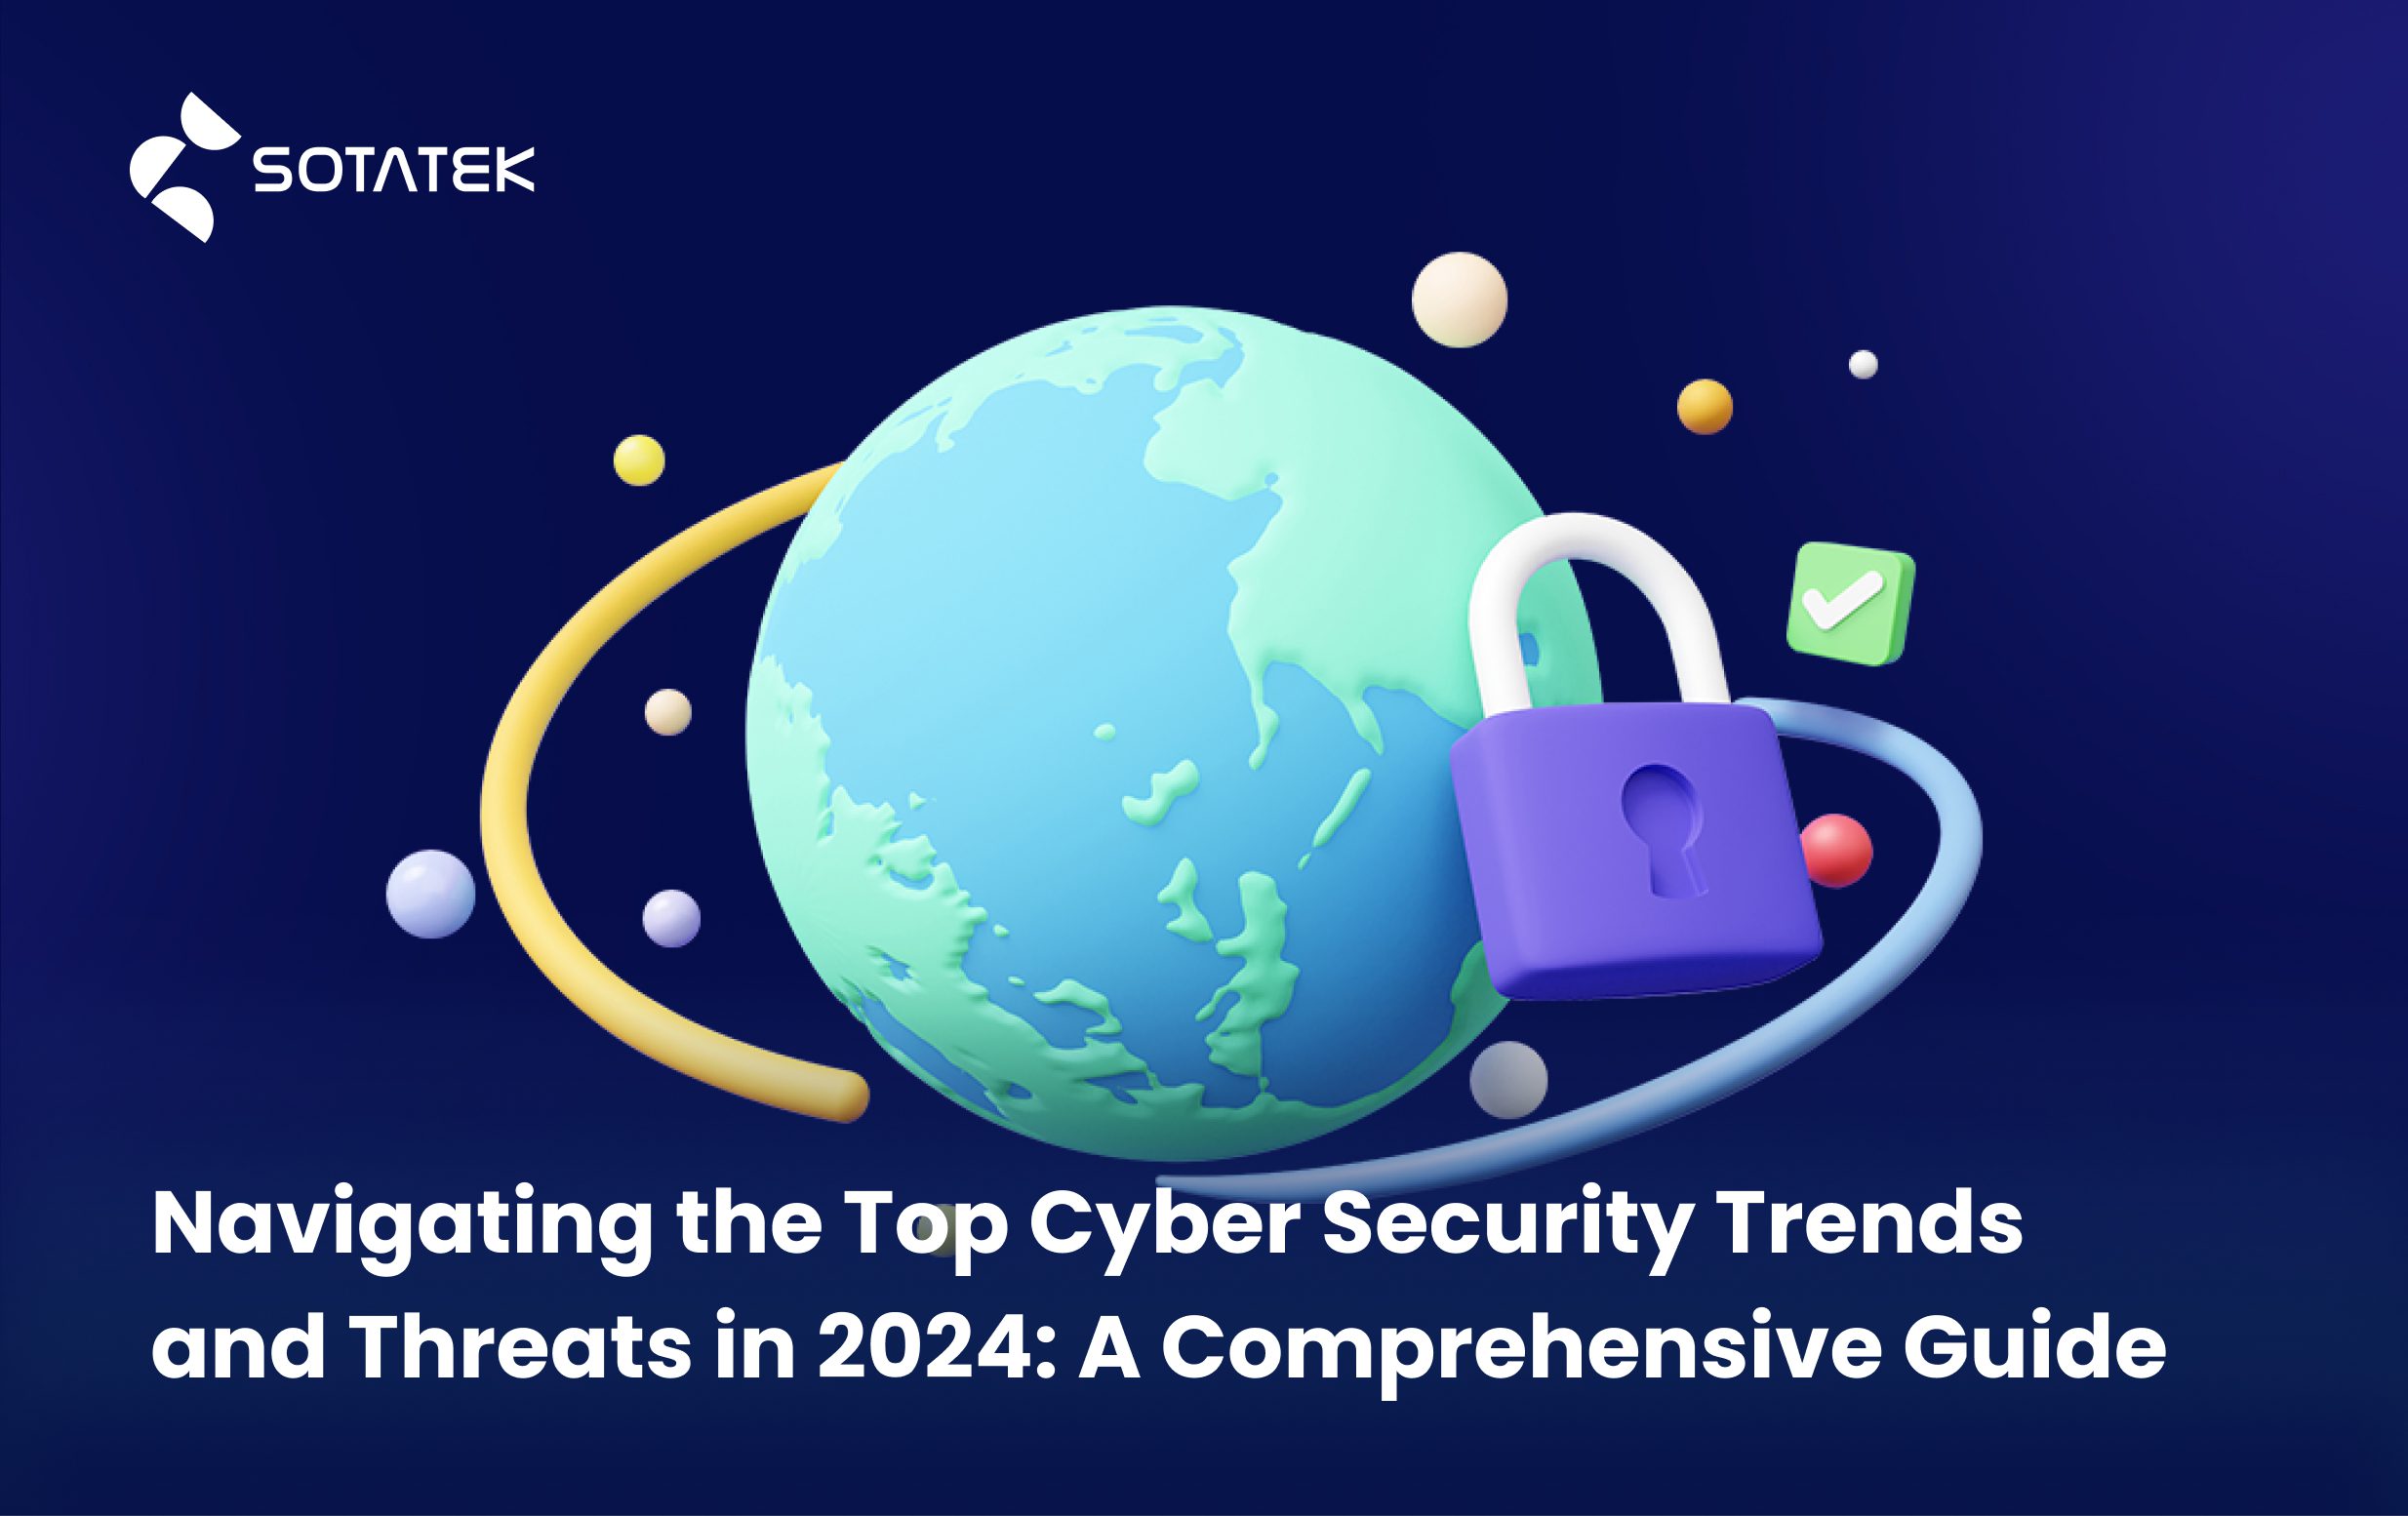 Navigating the Top Cyber Security Trends and Threats in 2024: A Comprehensive Guide